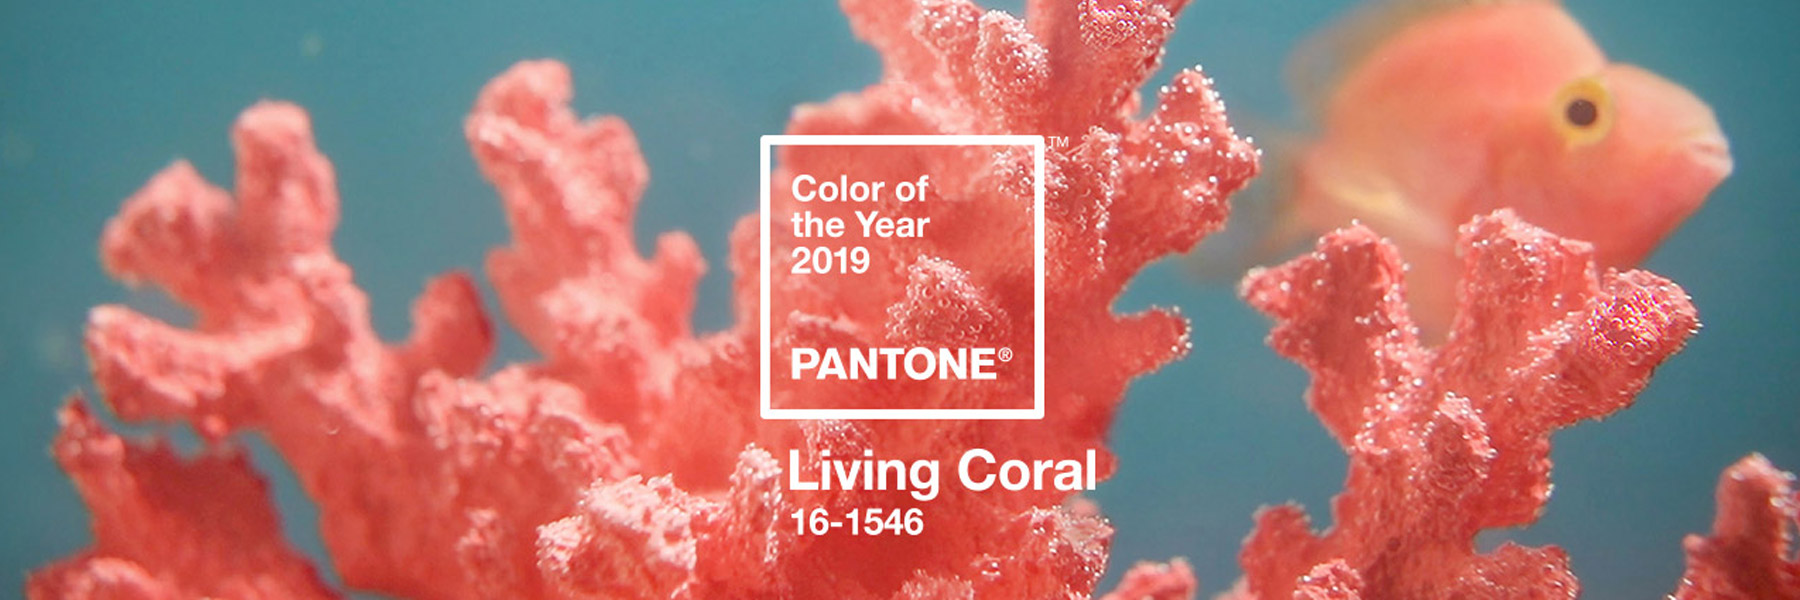 pantone announces 'living coral' as 2019 color of the year